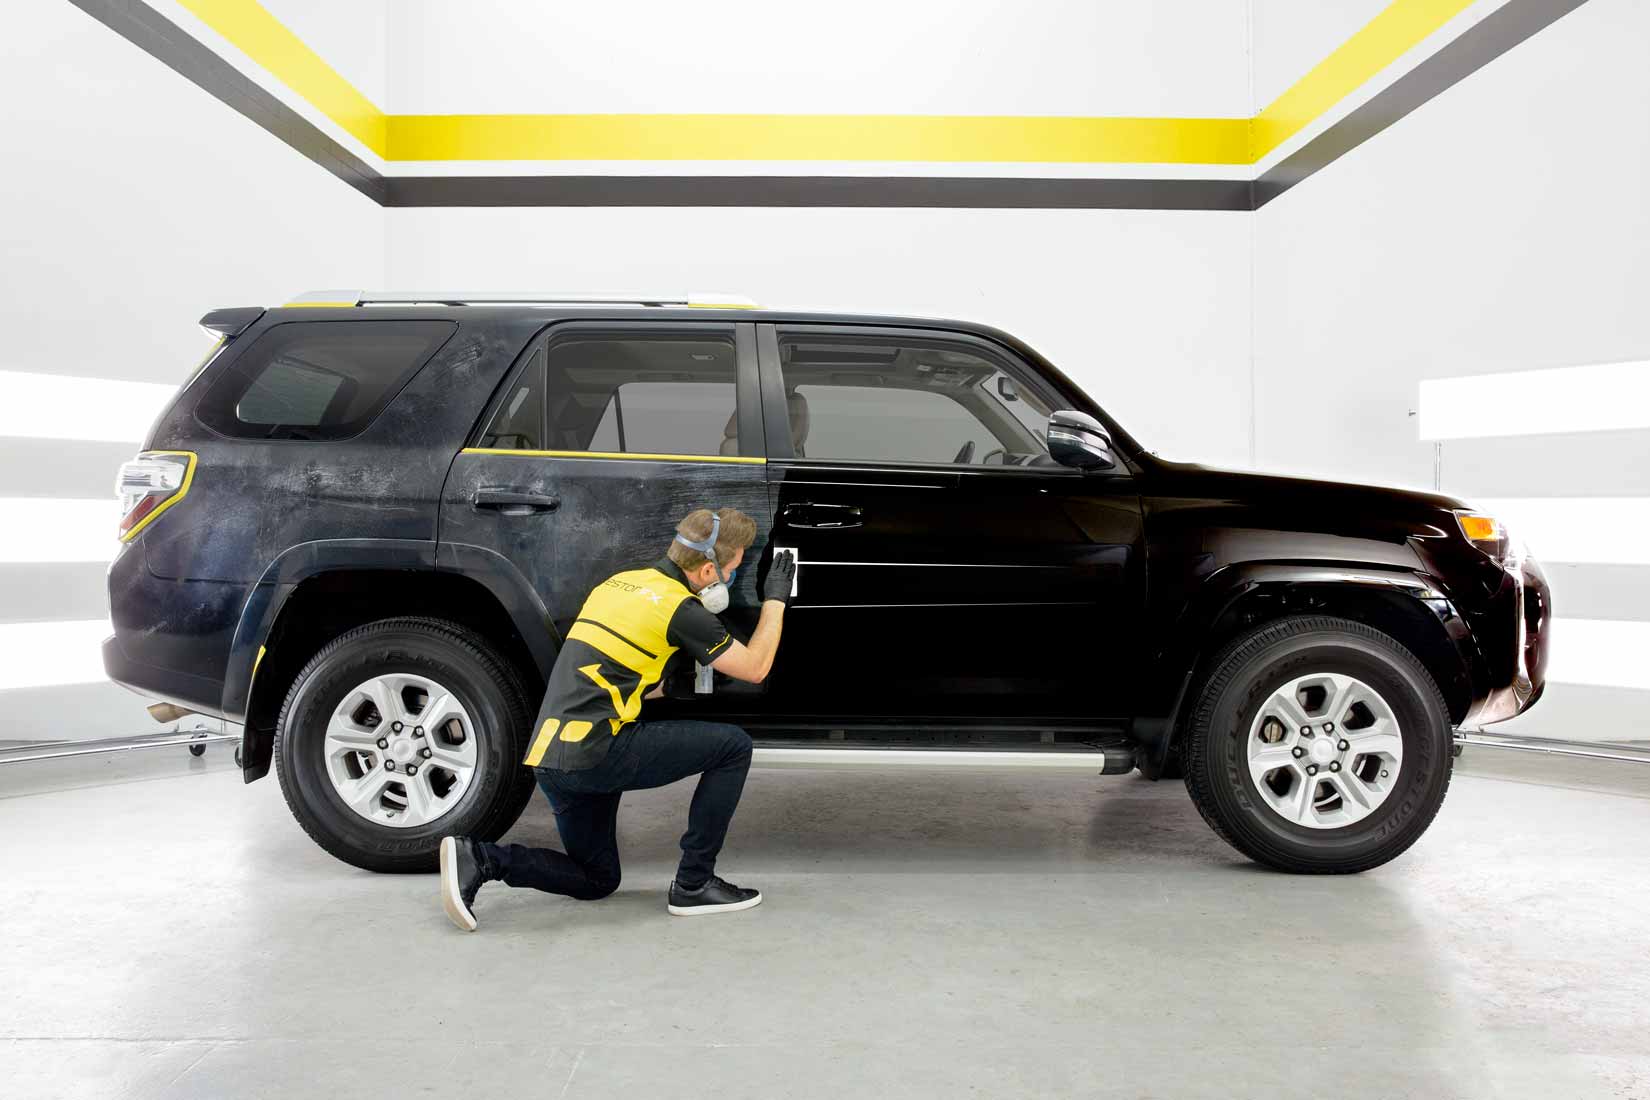 A RestorFX technician restoring the damaged and scratched side of a black SUV to a brilliant shine and luster